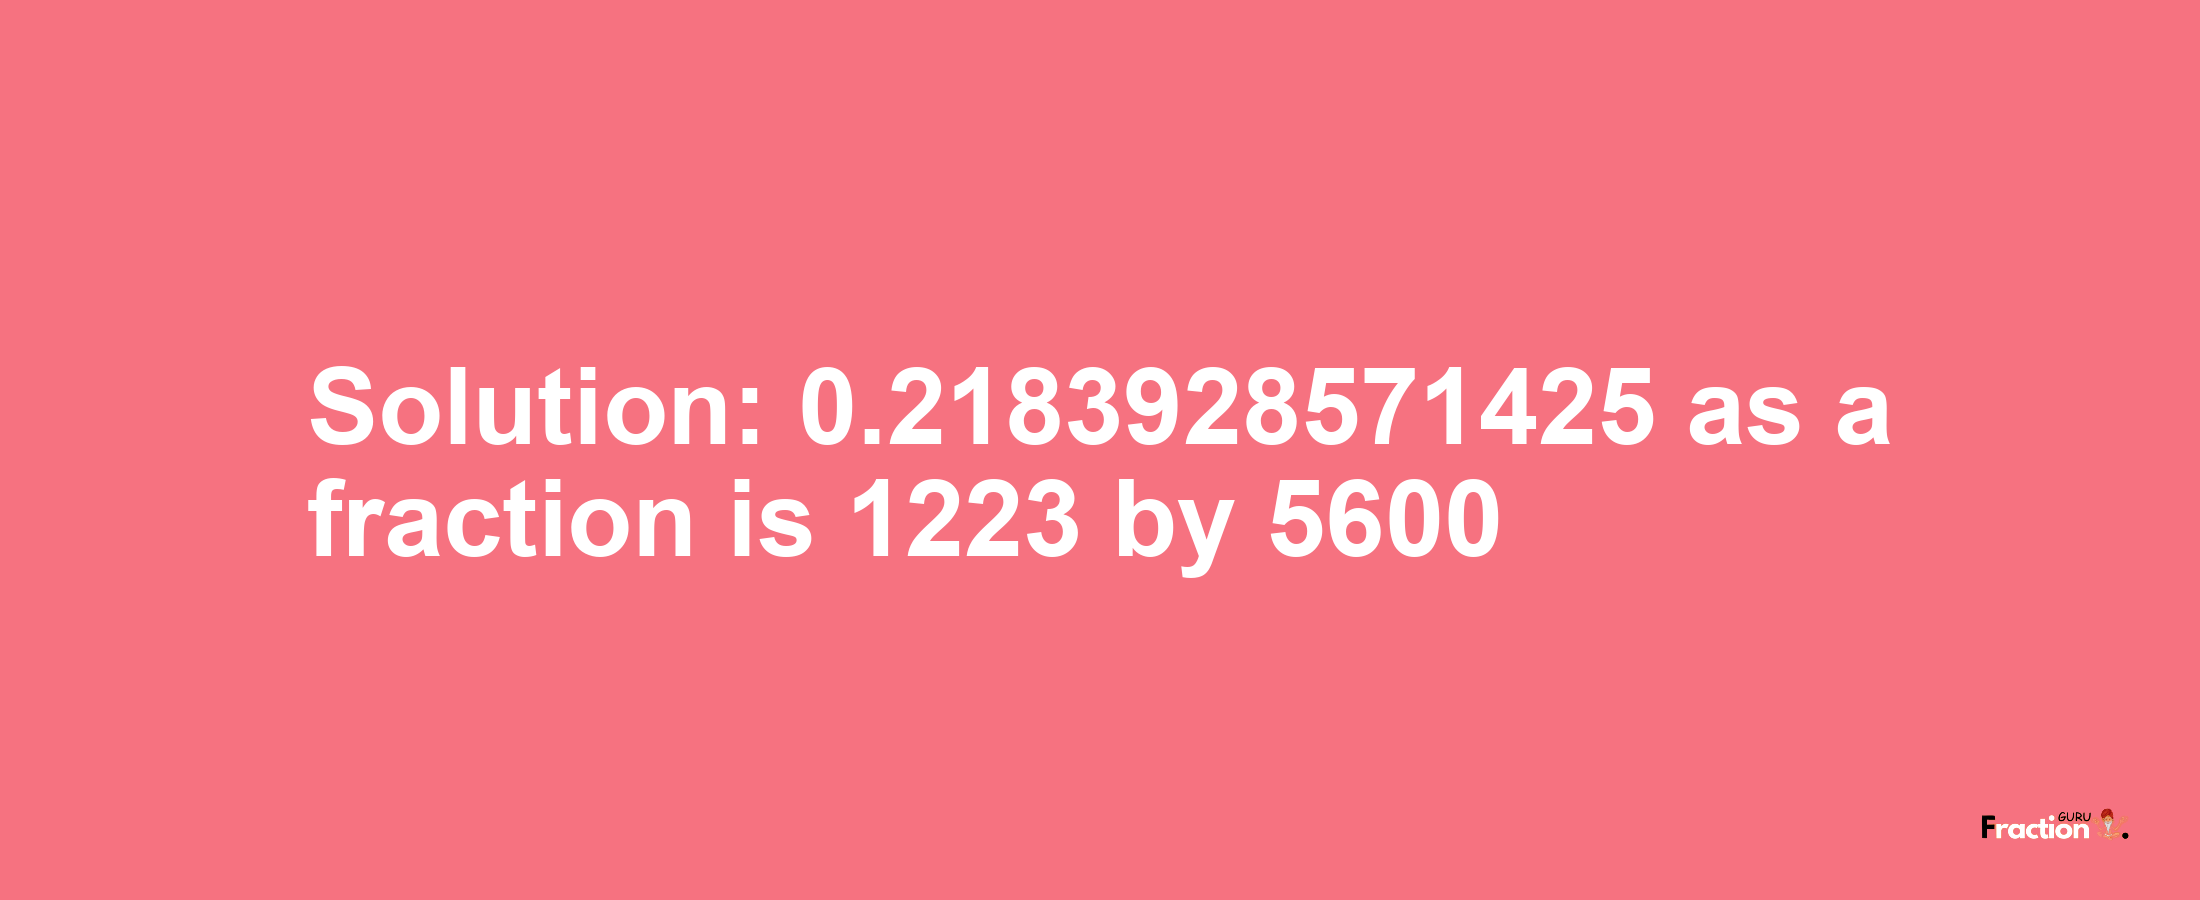 Solution:0.2183928571425 as a fraction is 1223/5600